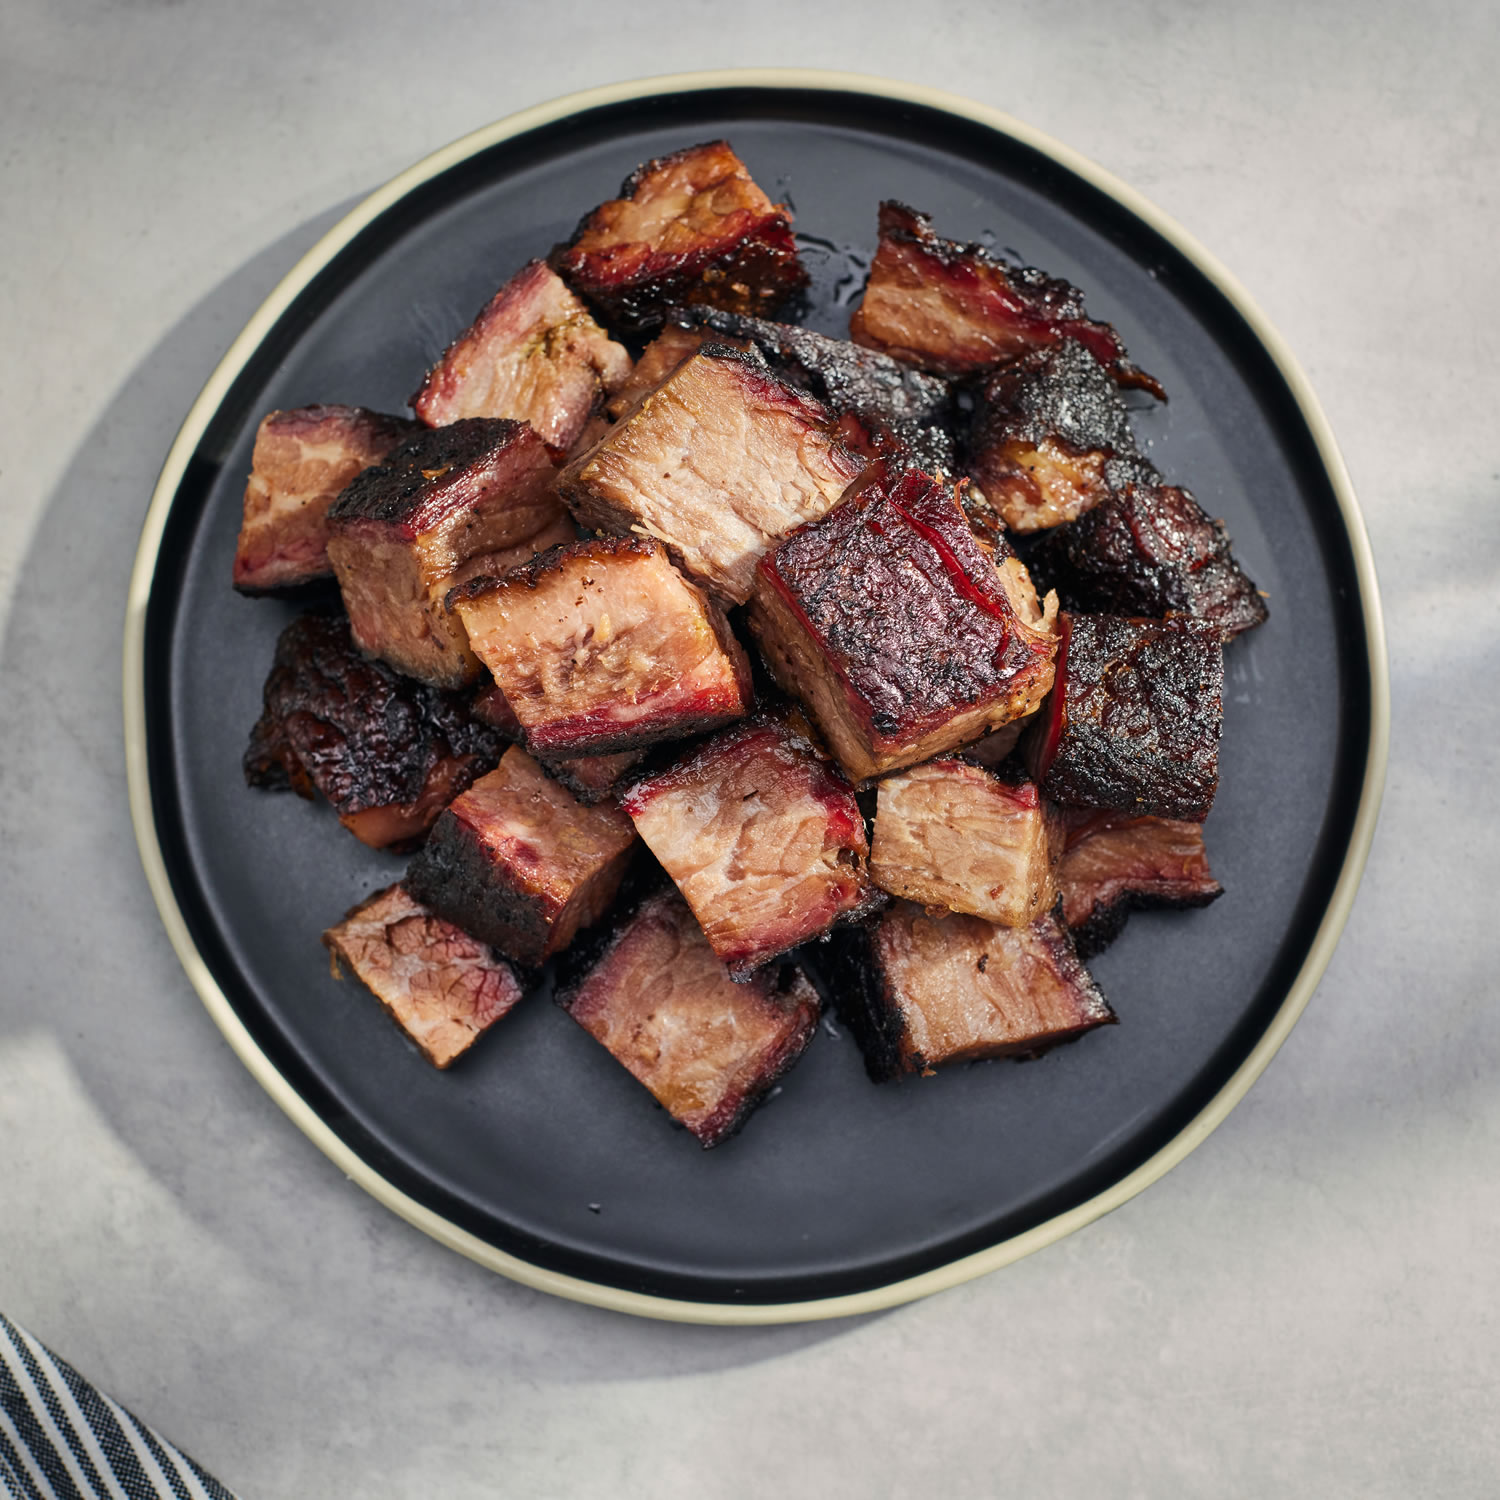 Beef Burnt Ends - 1 lb. - Add $5